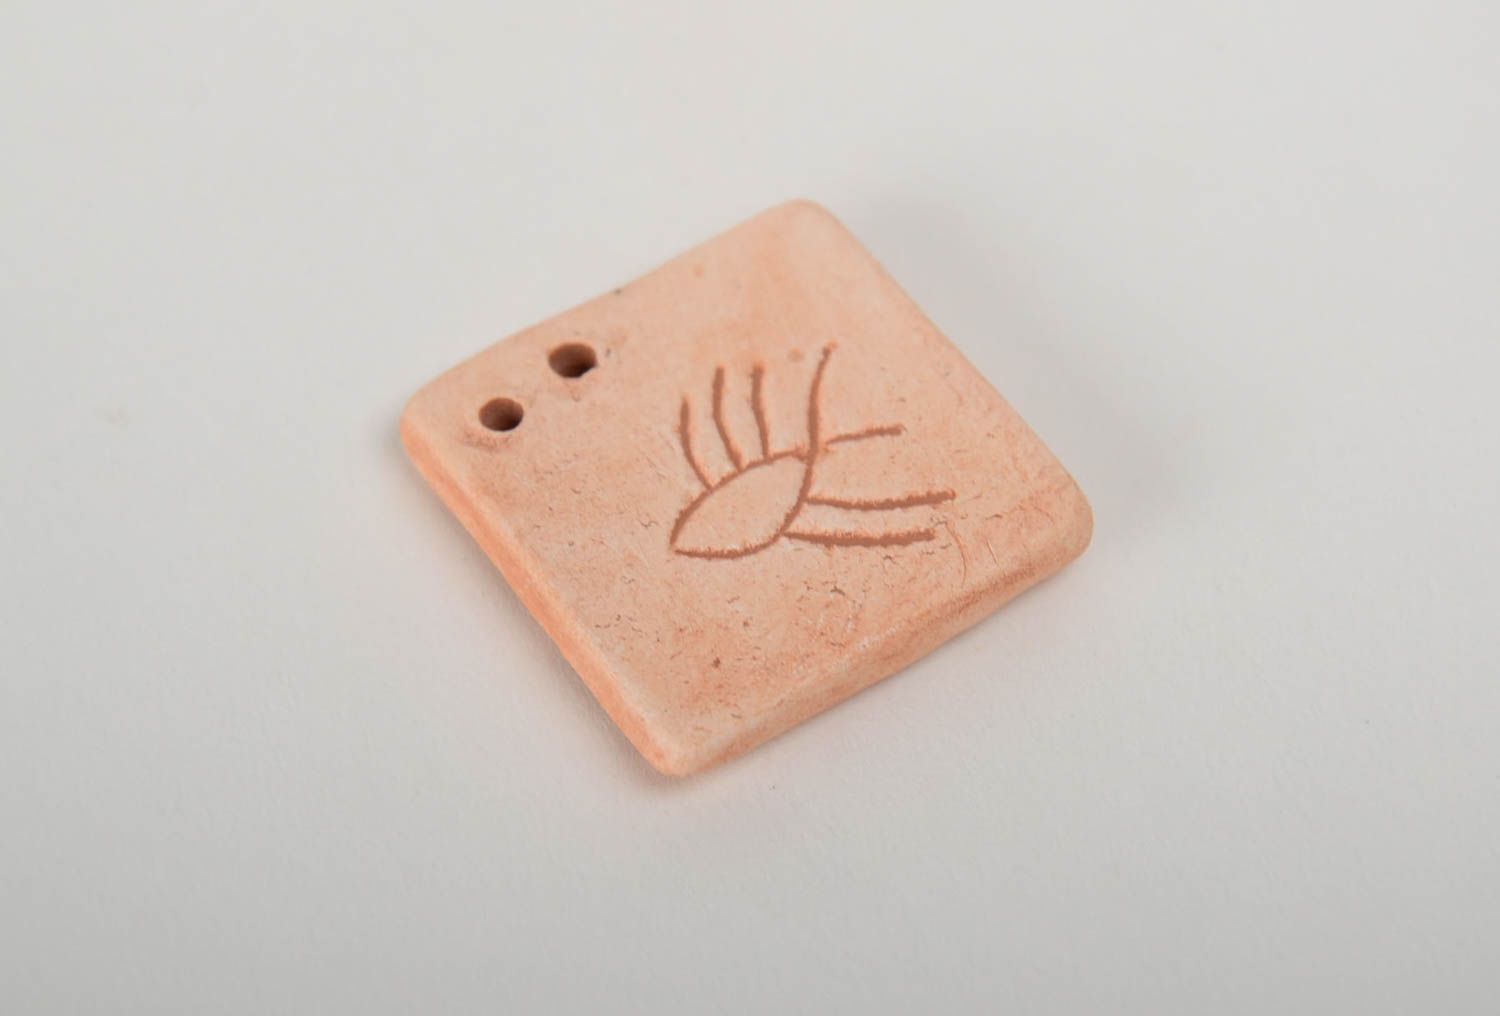 Square flat ceramic jewelry finding for painting and necklace or pendant making photo 3